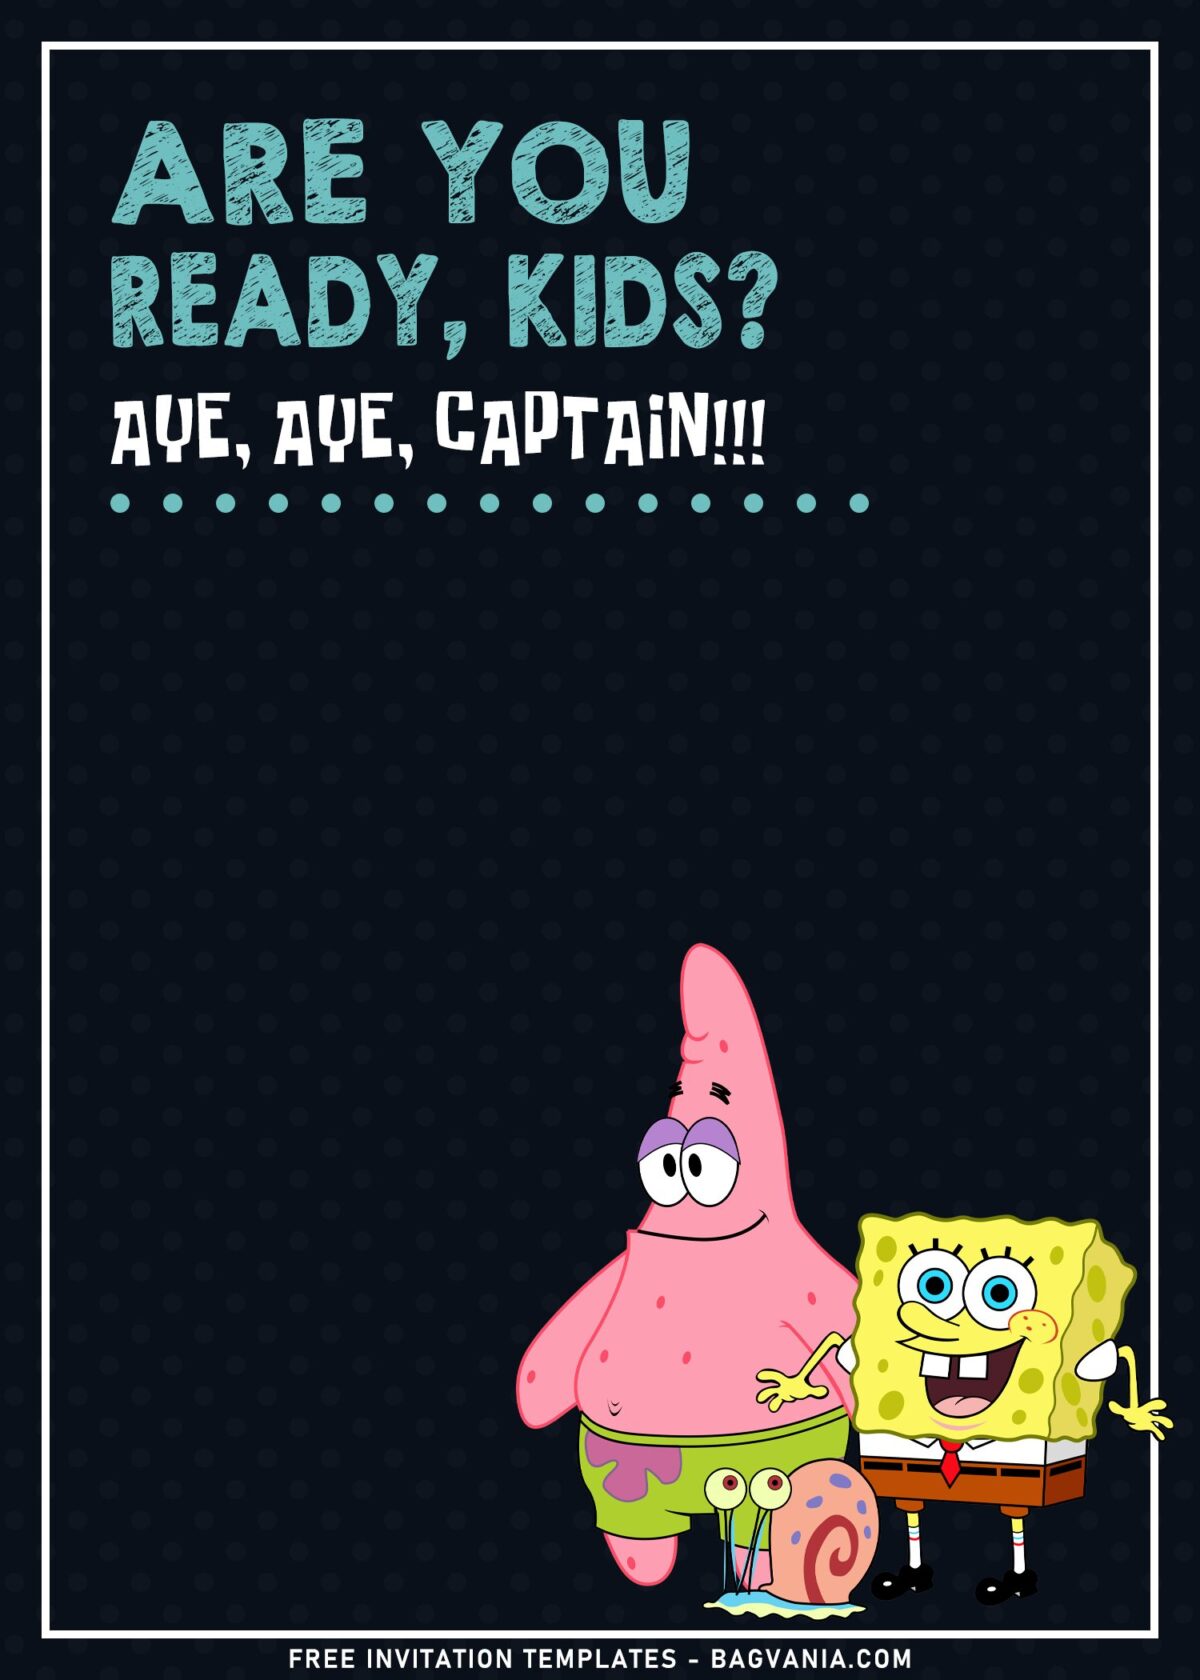 10+ Lively Colored SpongeBob SquarePants Birthday Invitation Templates with Chalkboard background and drawings